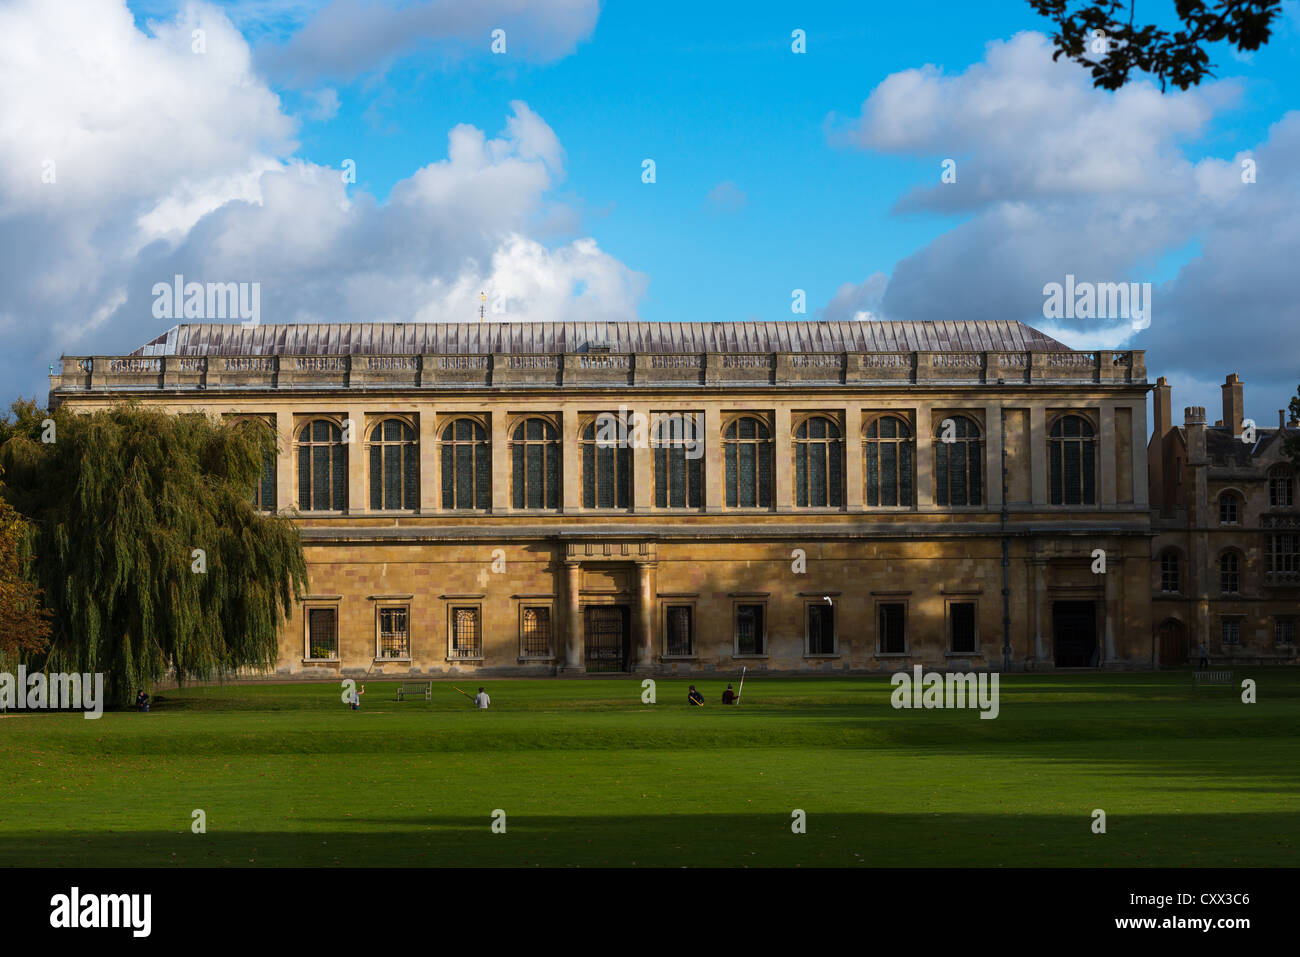 The Wren Library, Trinity College Cambridge, with punting in front on the river Cam, UK Stock Photo